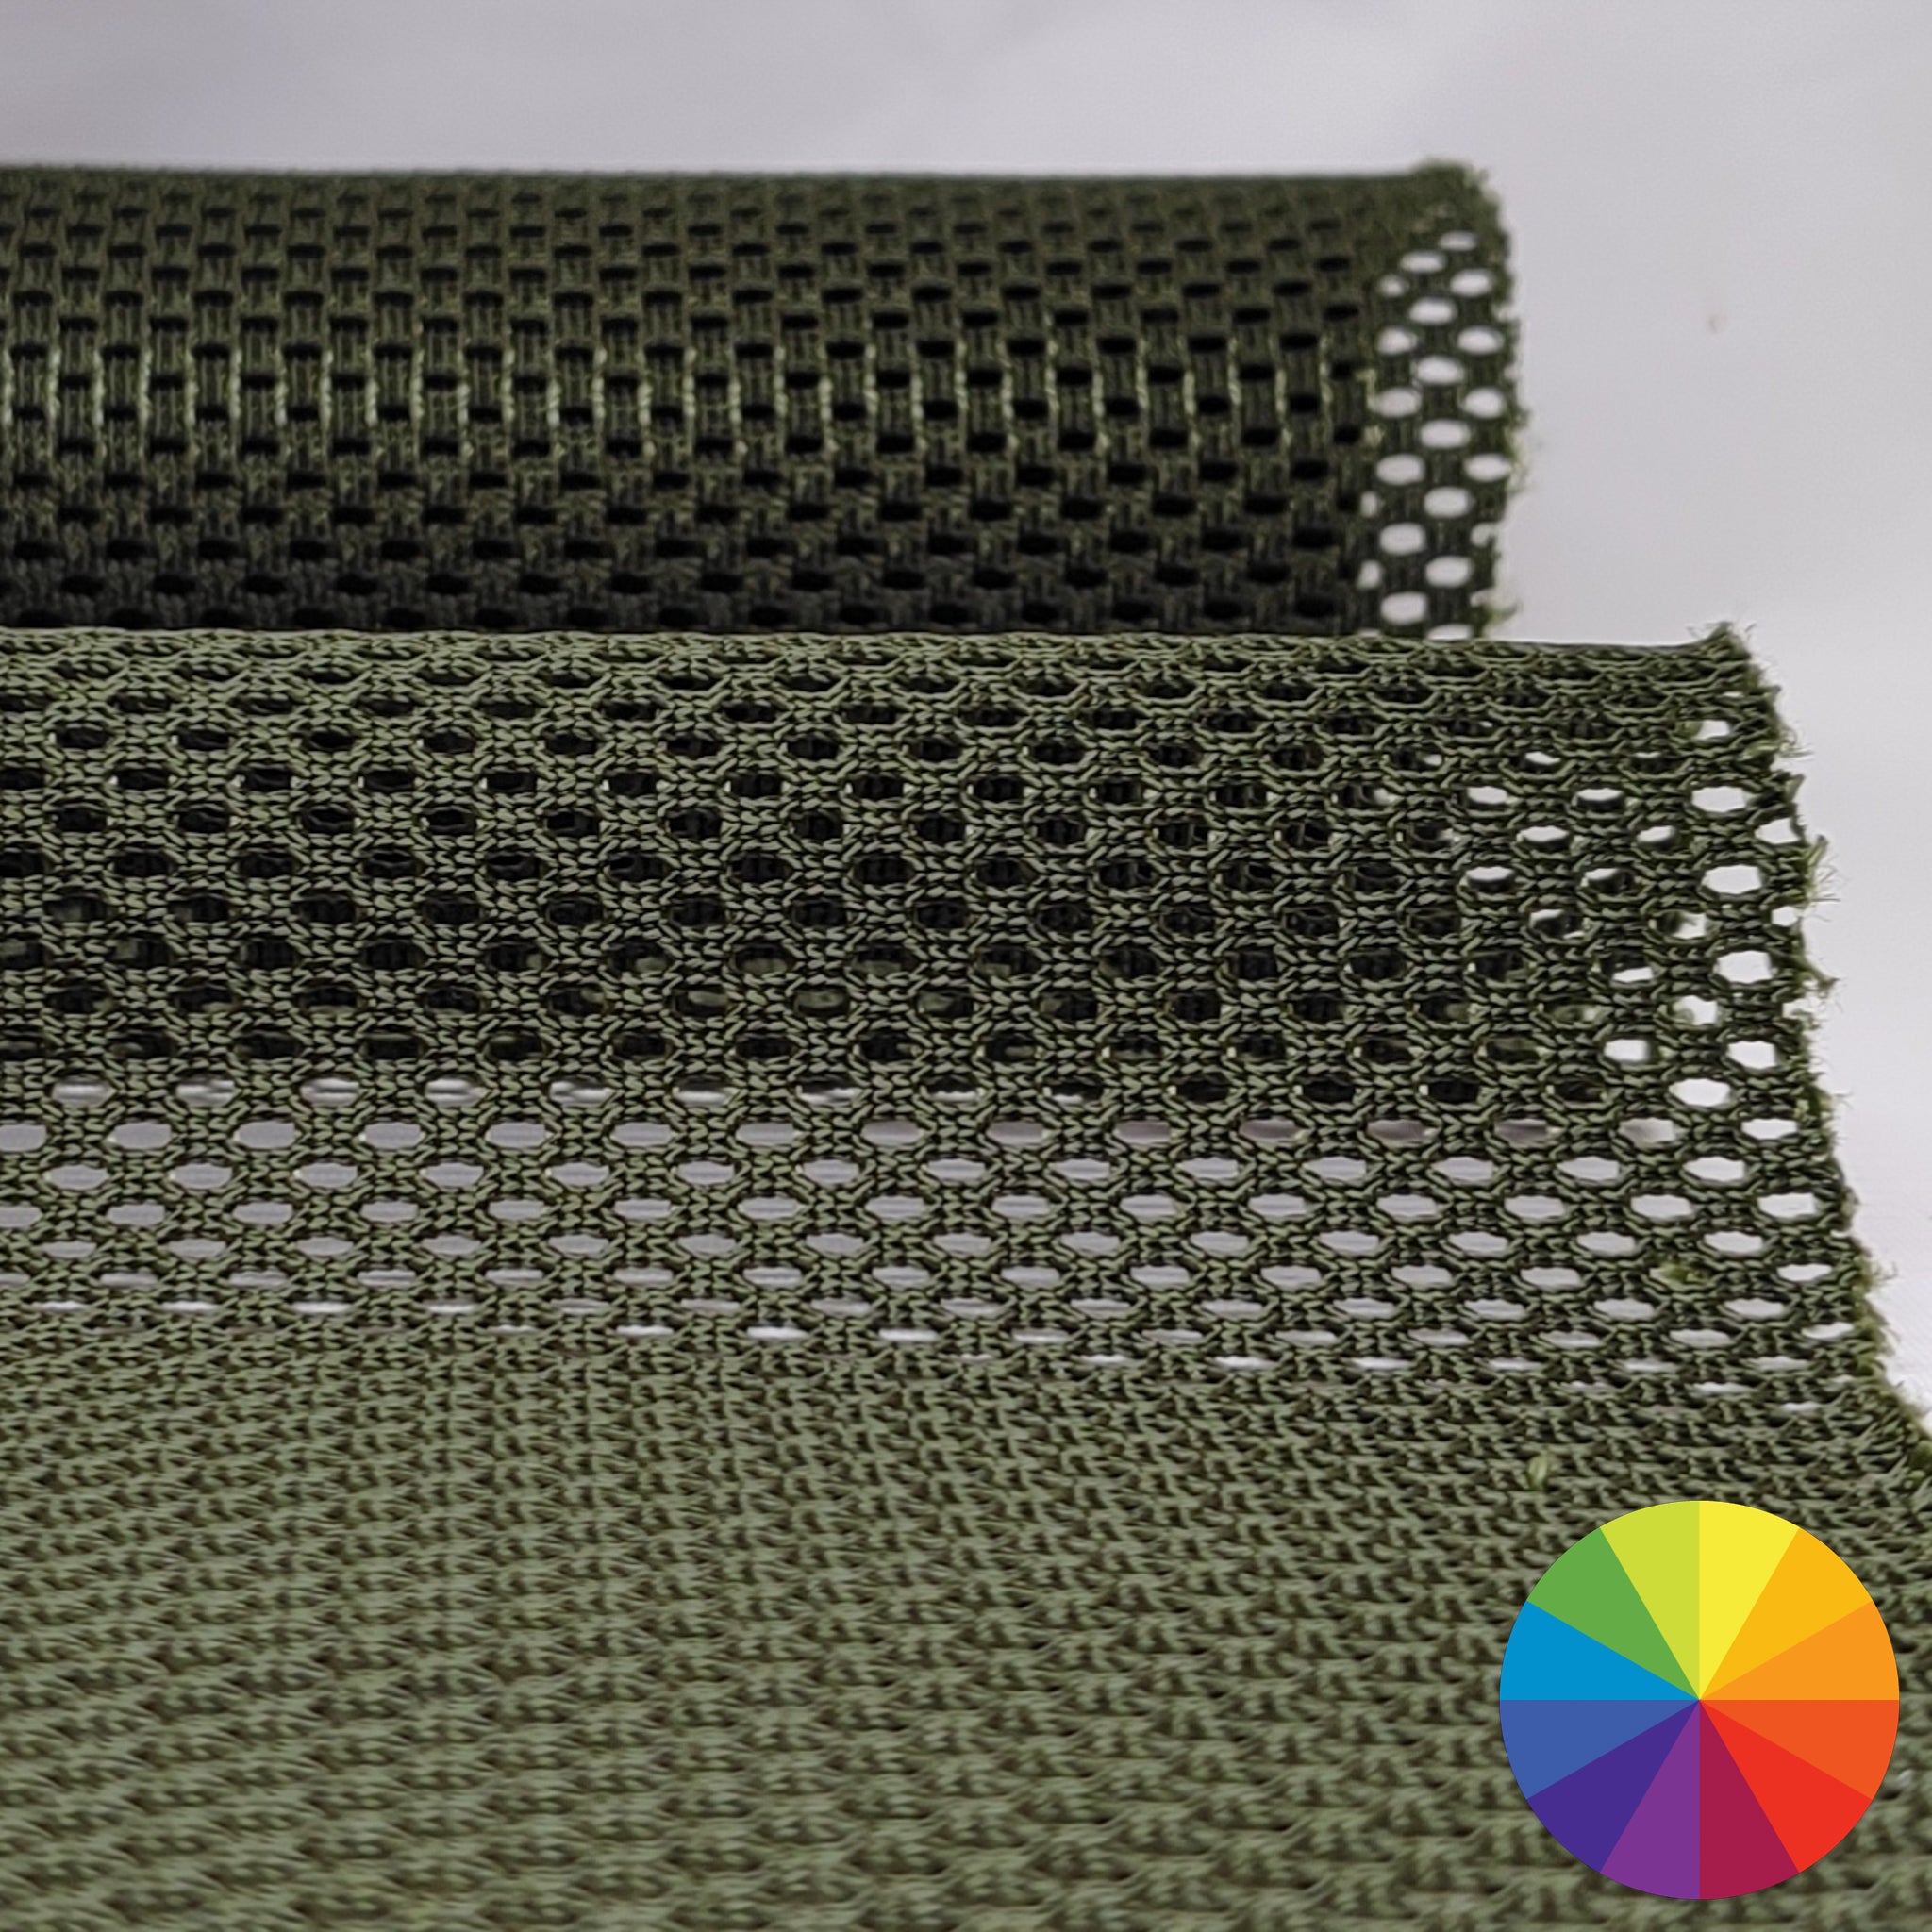 Breathable fabric in an awesome hex pattern.